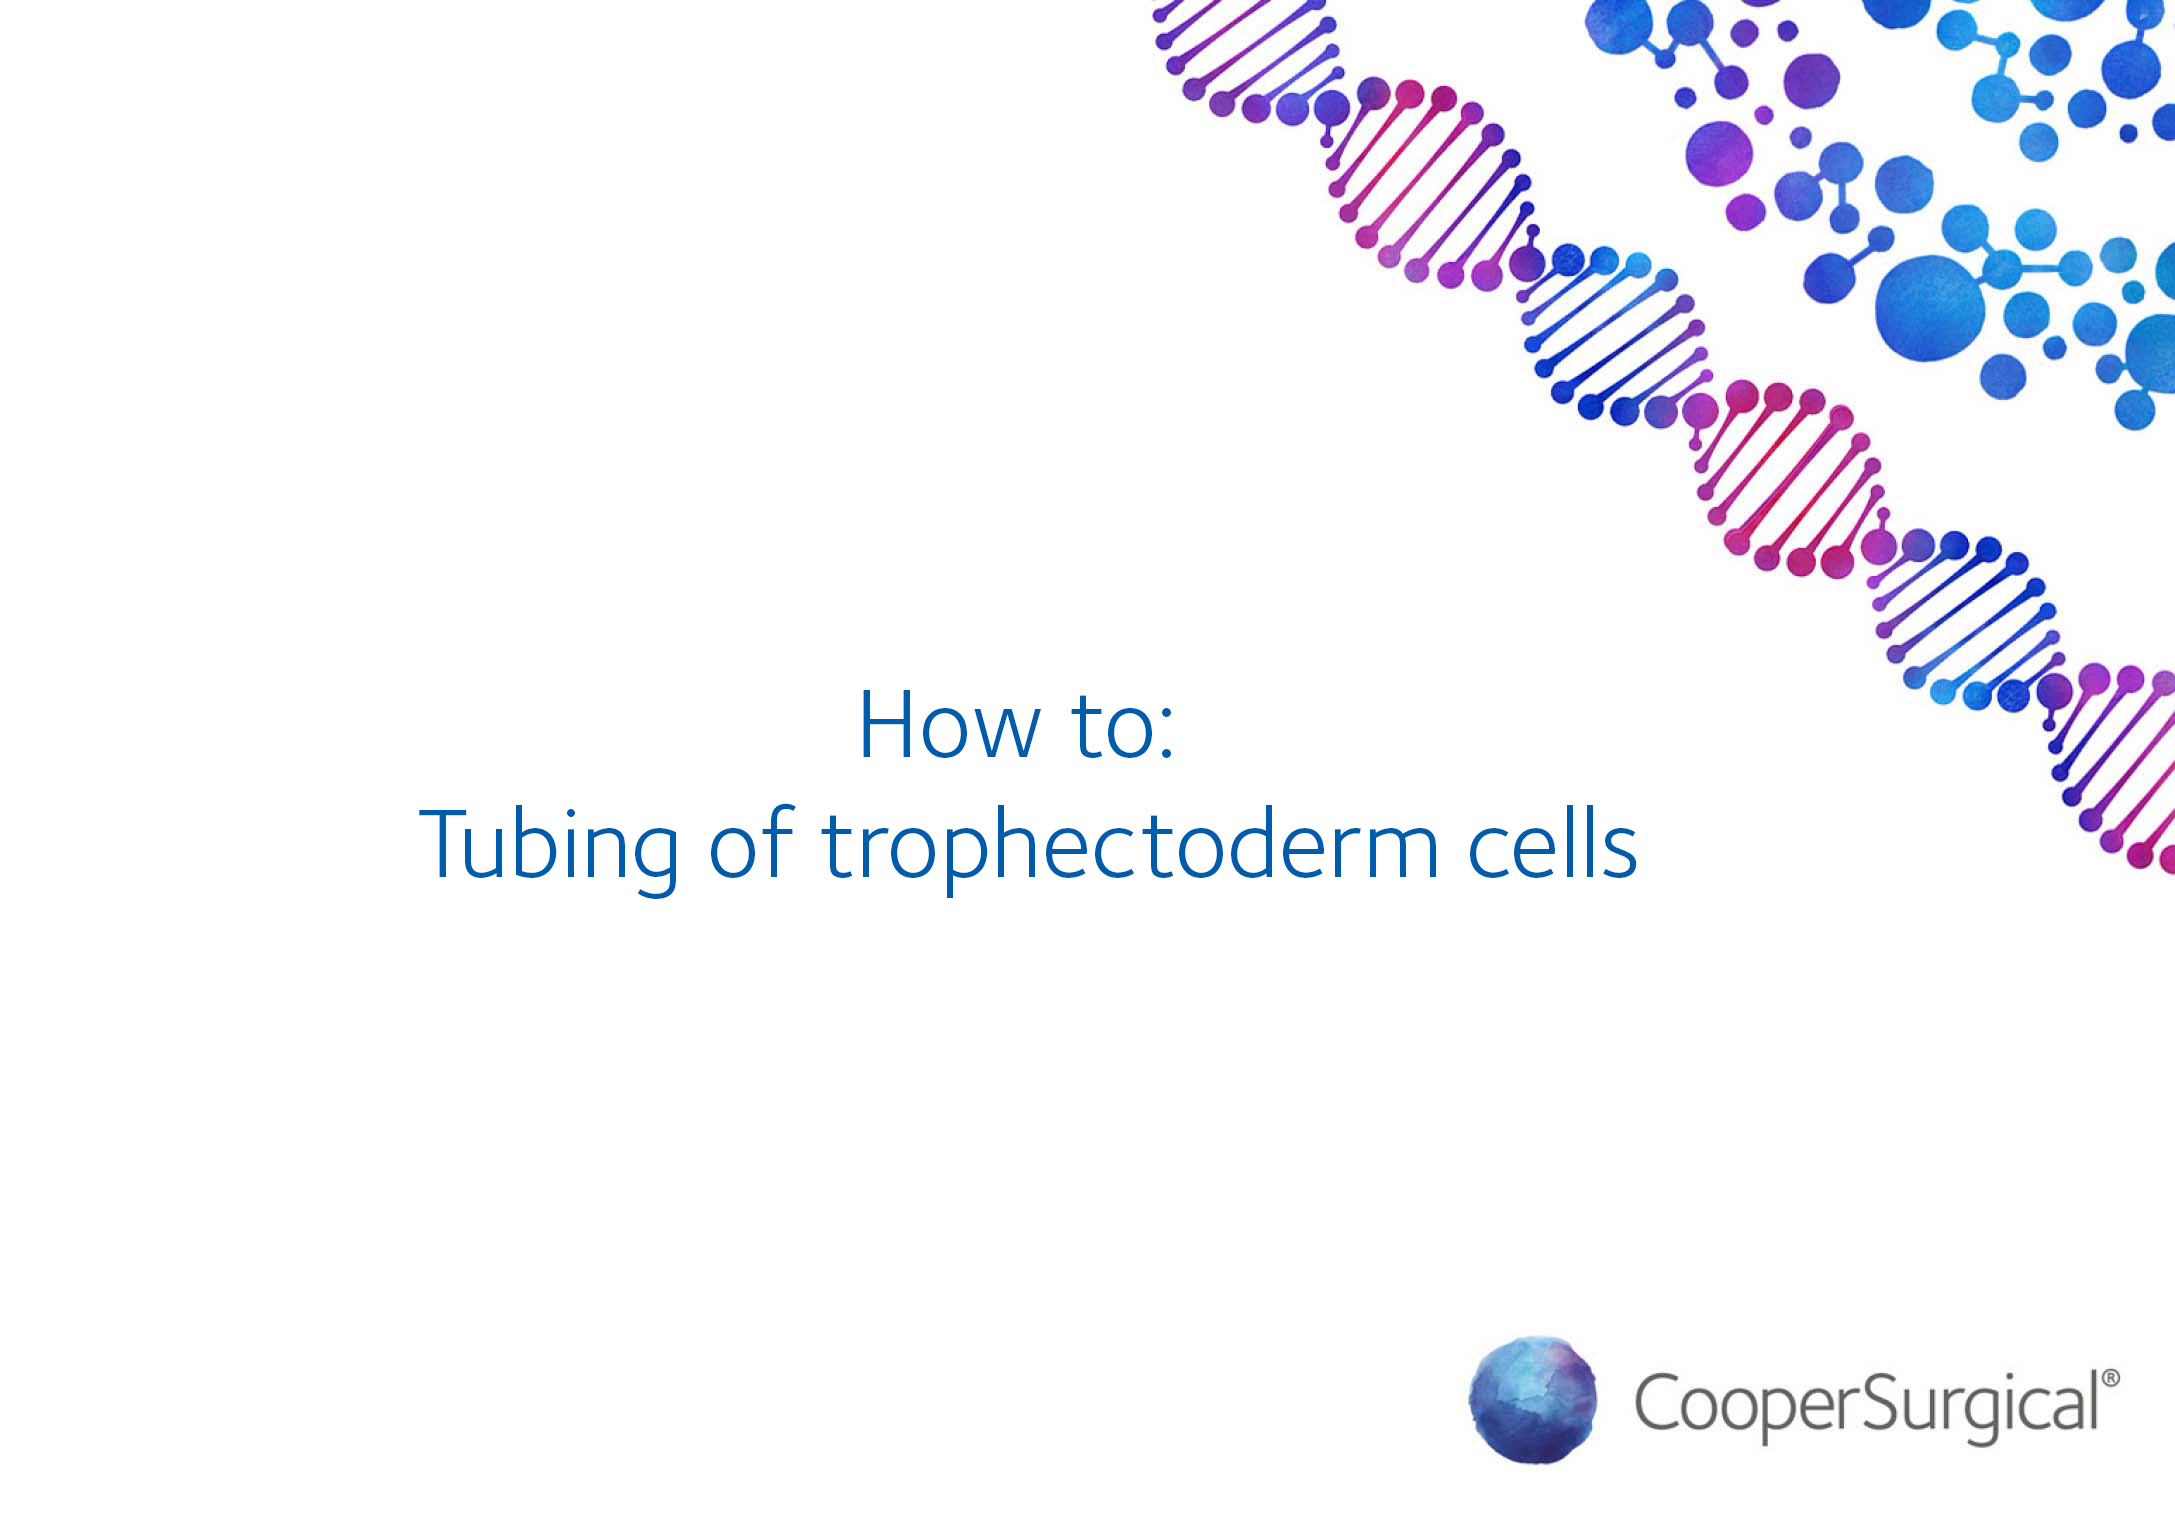 How To: Tubing of trophectoderm cells